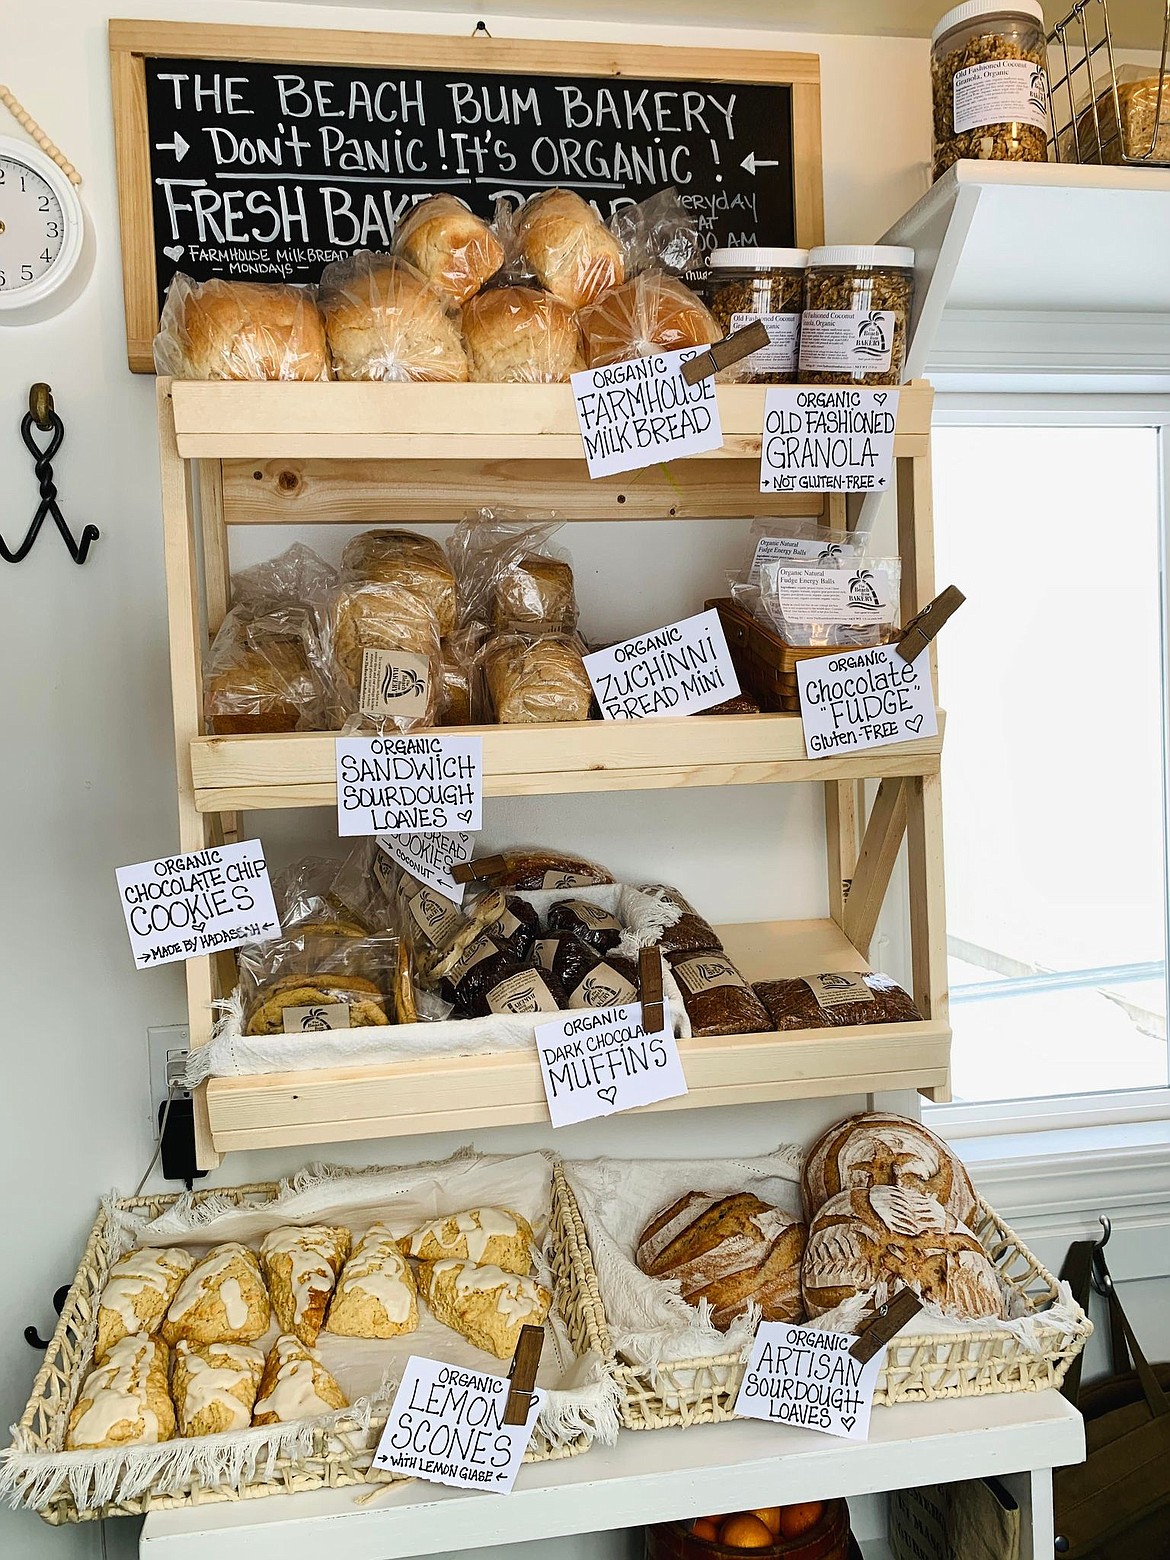 A selection of the rotating delicious baked goods sold at The Beach Bum Bakery.